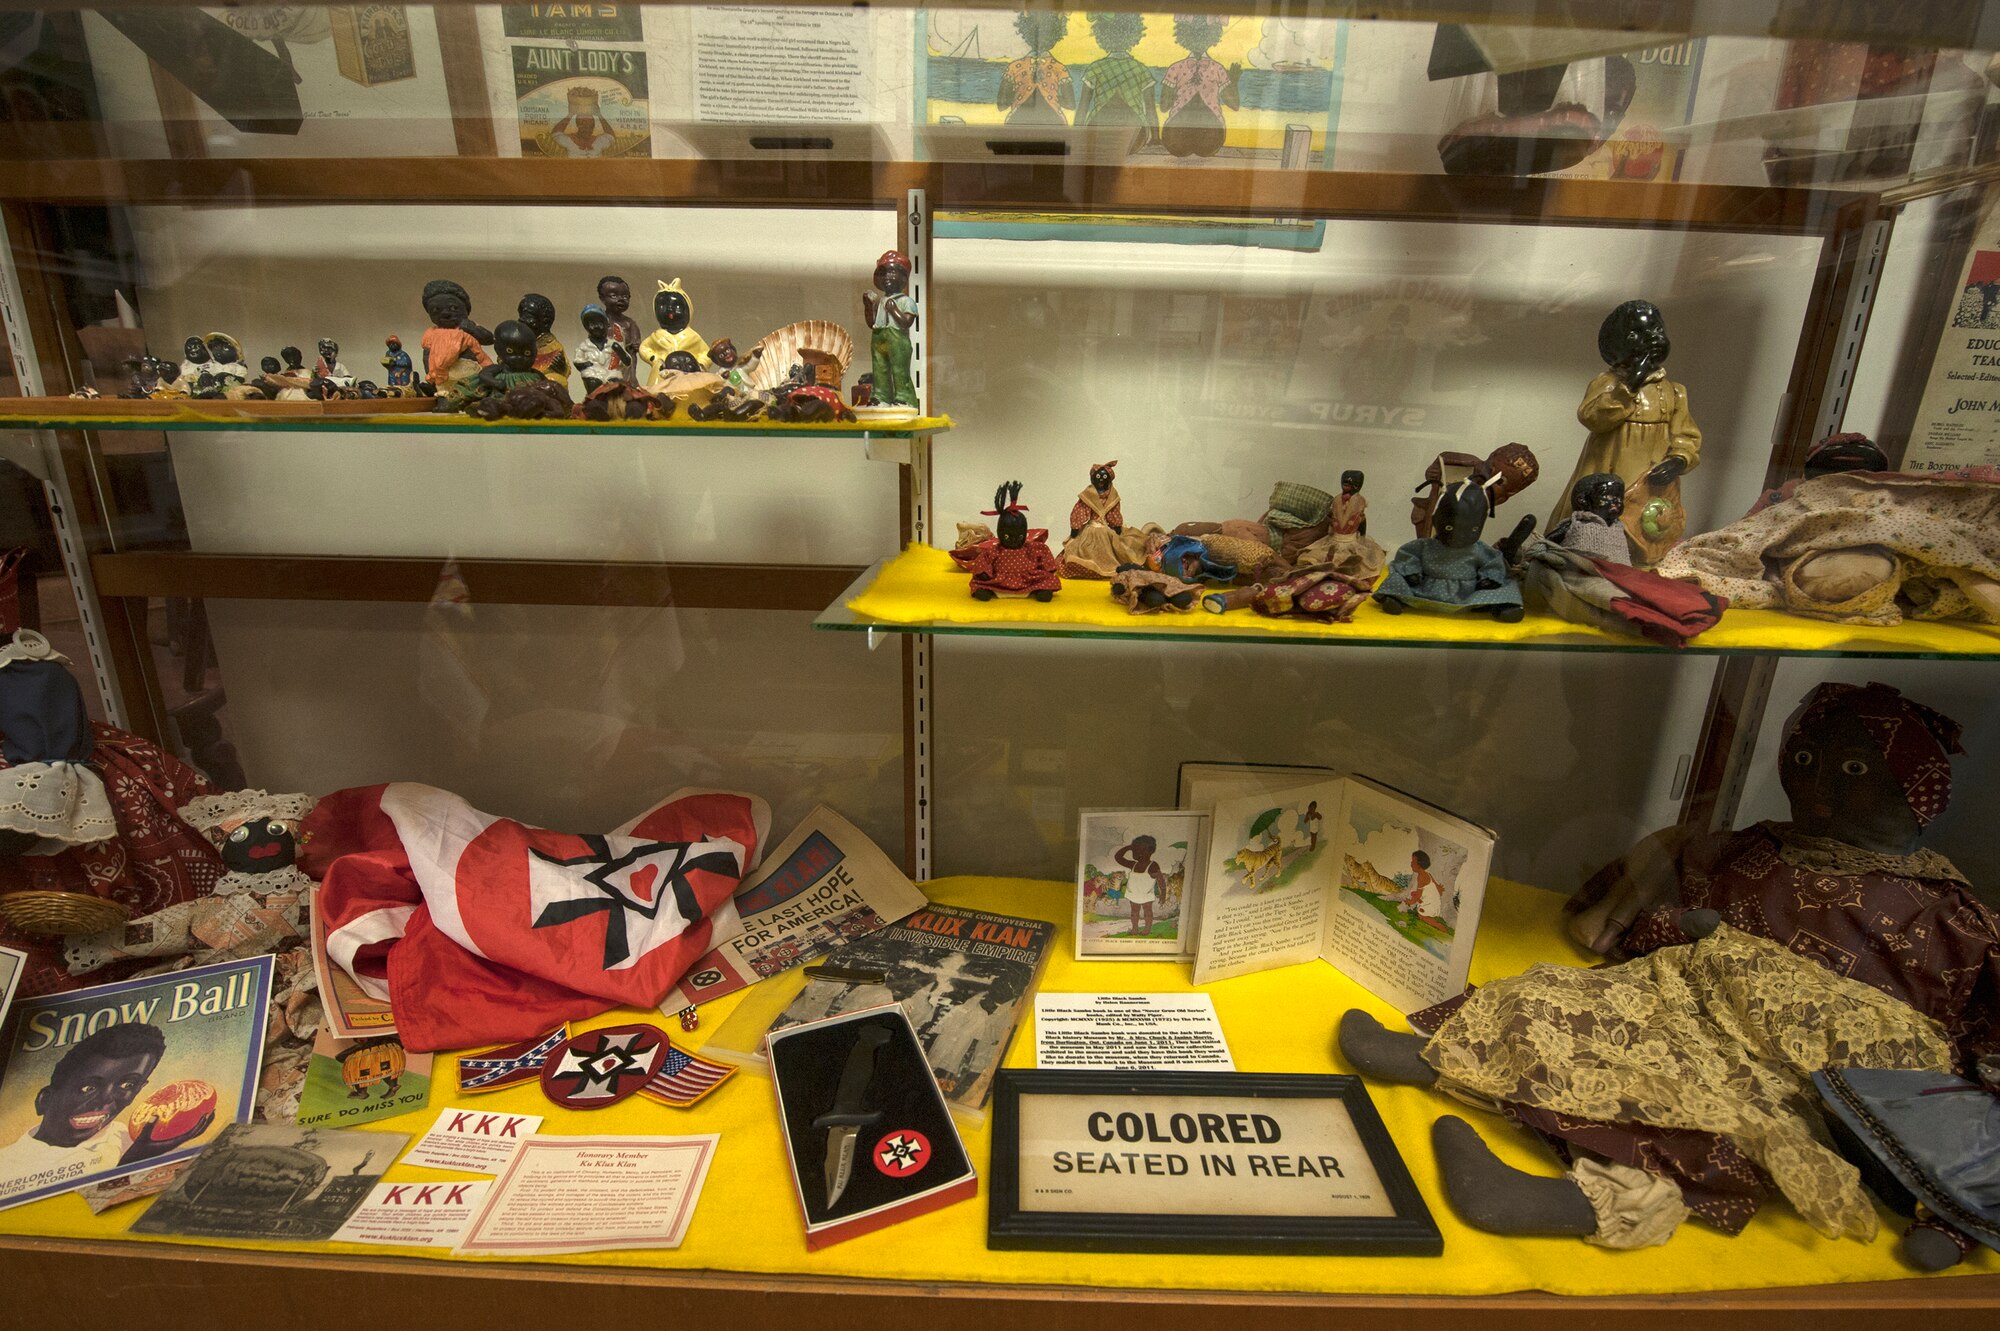 Figurines and artifacts from the Jim Crow era rest in a display case Feb. 8, 2016, at the Jack Hadley Black History Museum in Thomasville, Ga.  Jim Crow laws were enacted after slavery was abolished and were used to reinforce segregation and restrict the freedom of black people. (U.S. Air Force photo by Airman 1st Class Janiqua P. Robinson/Released)
